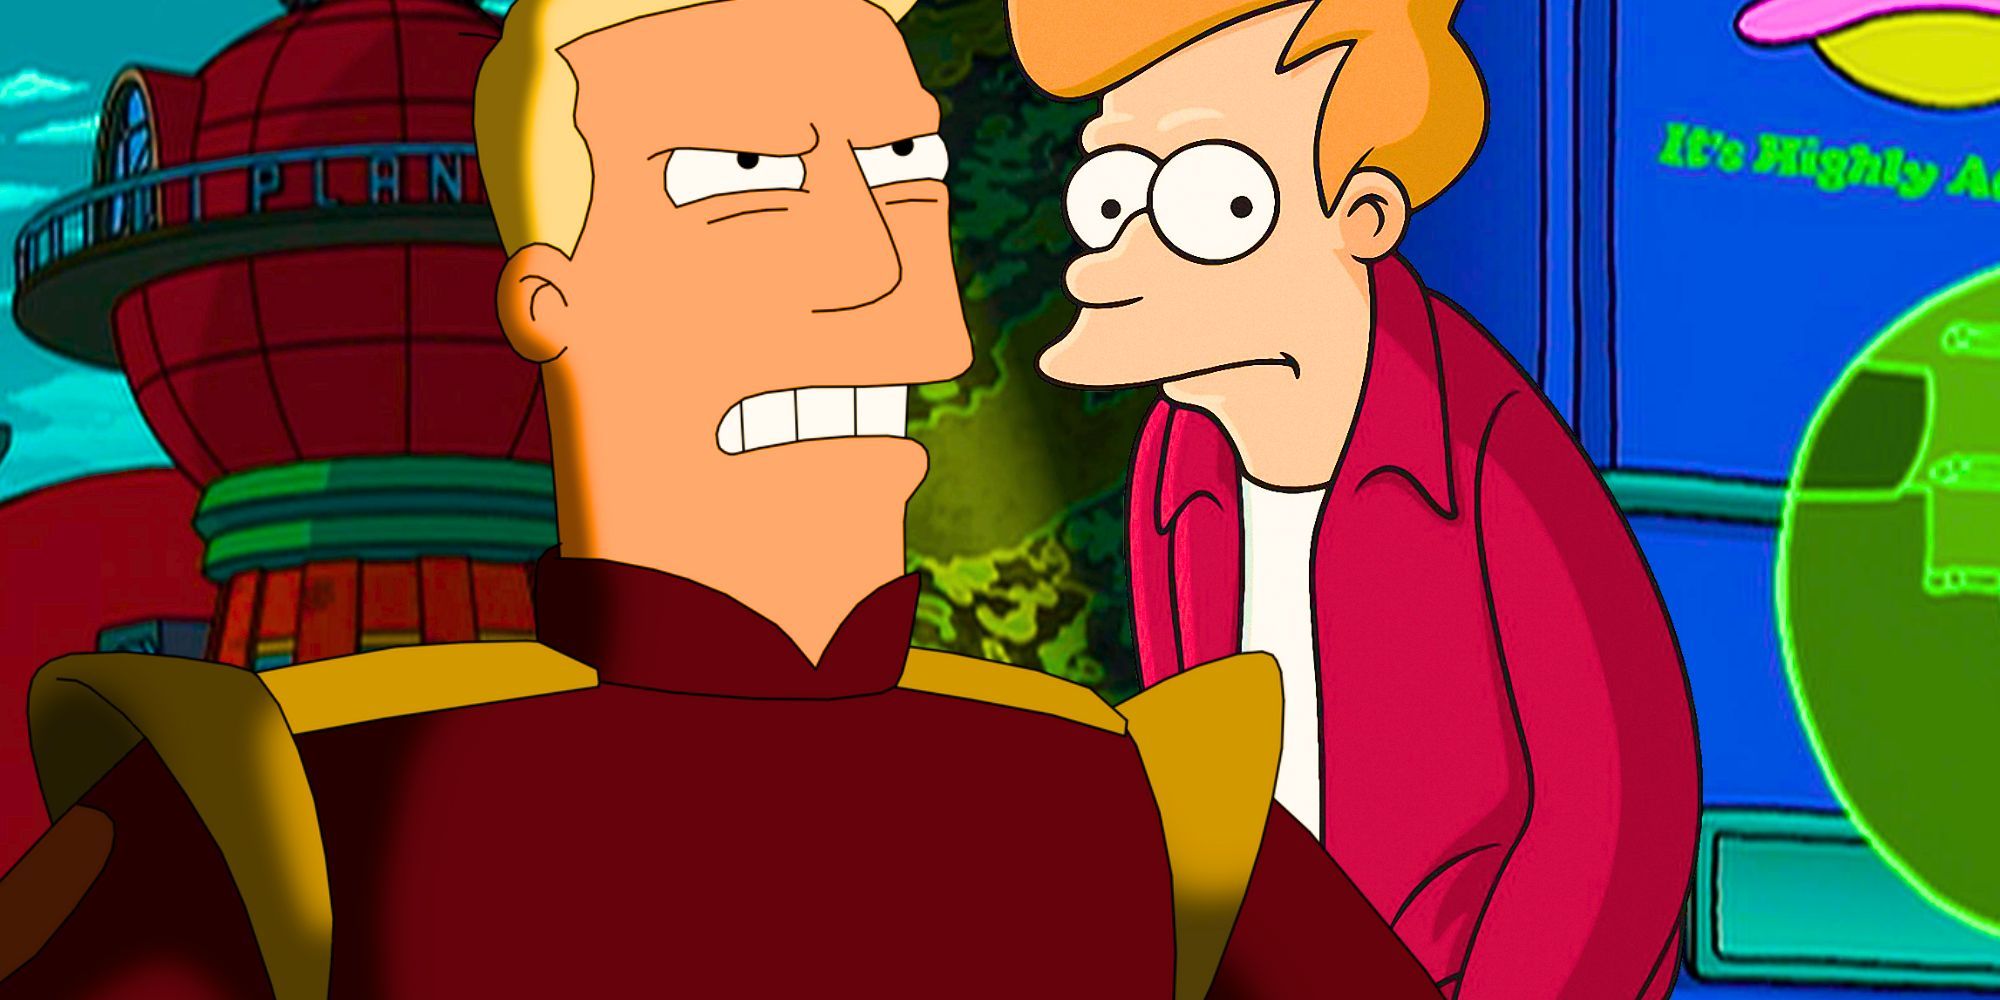 A custom image of Zapp Brannigan and Fry against a backdrop of blended Futurama imagery